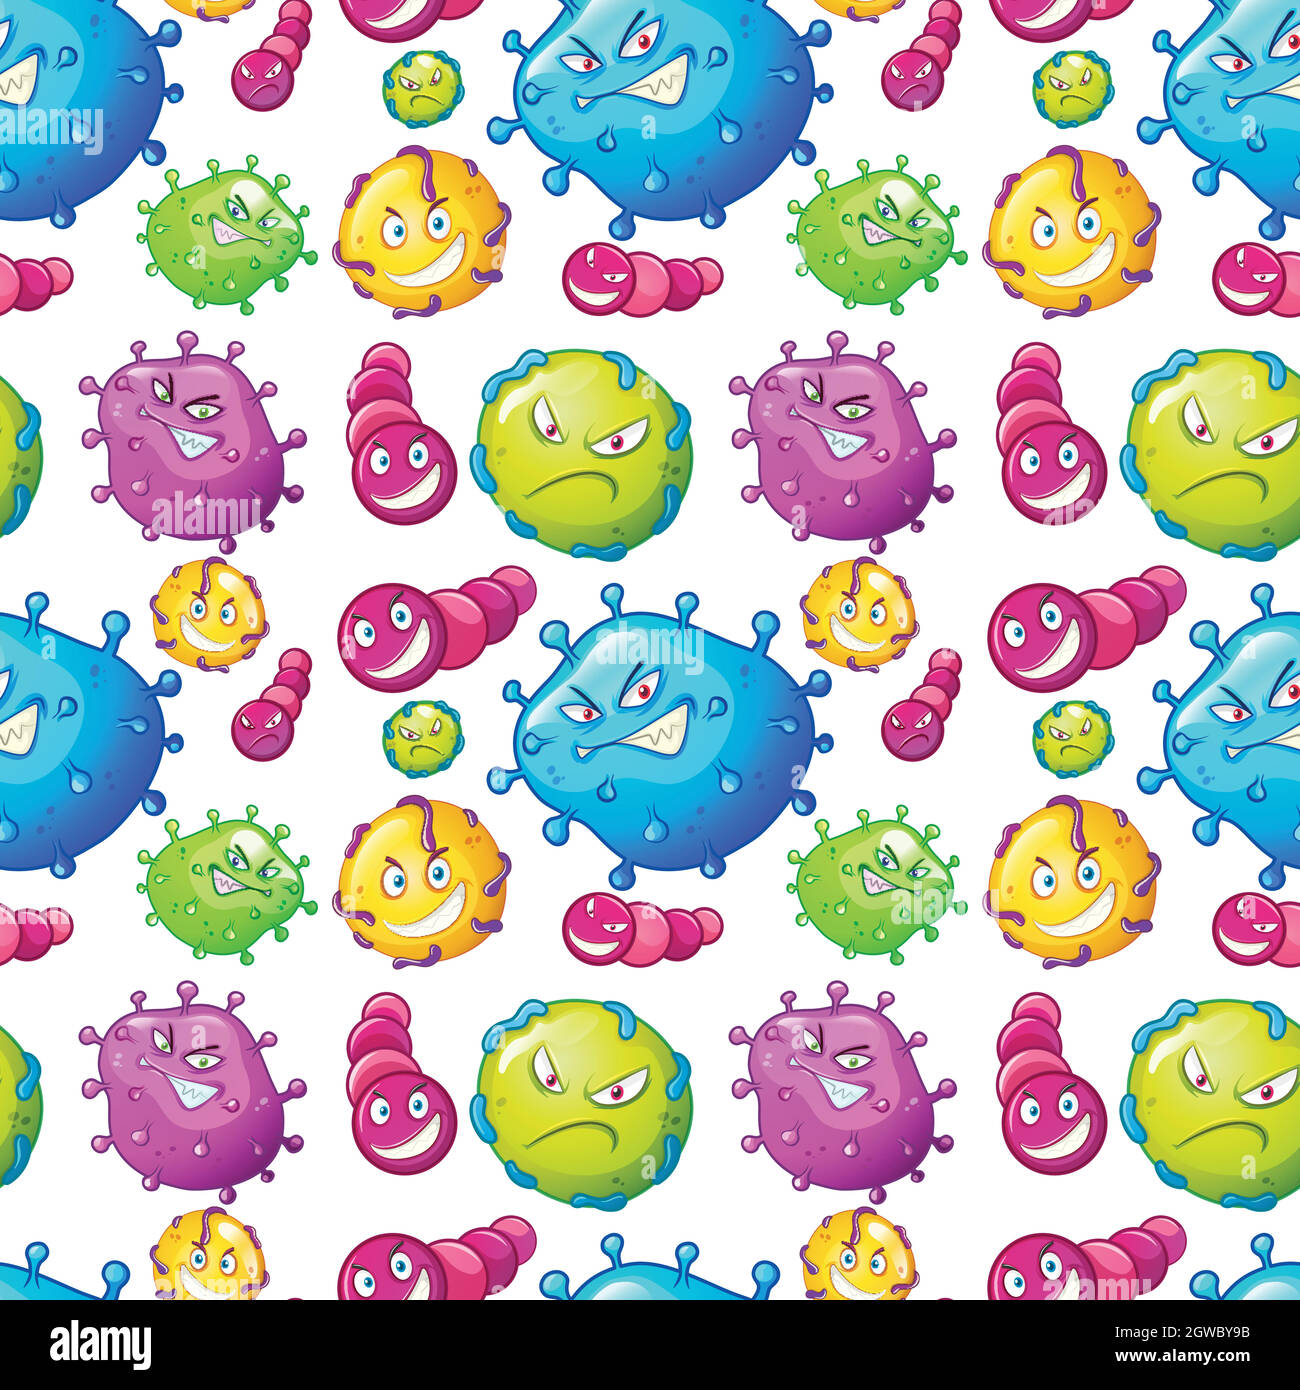 Seamless background template with germs Stock Vector